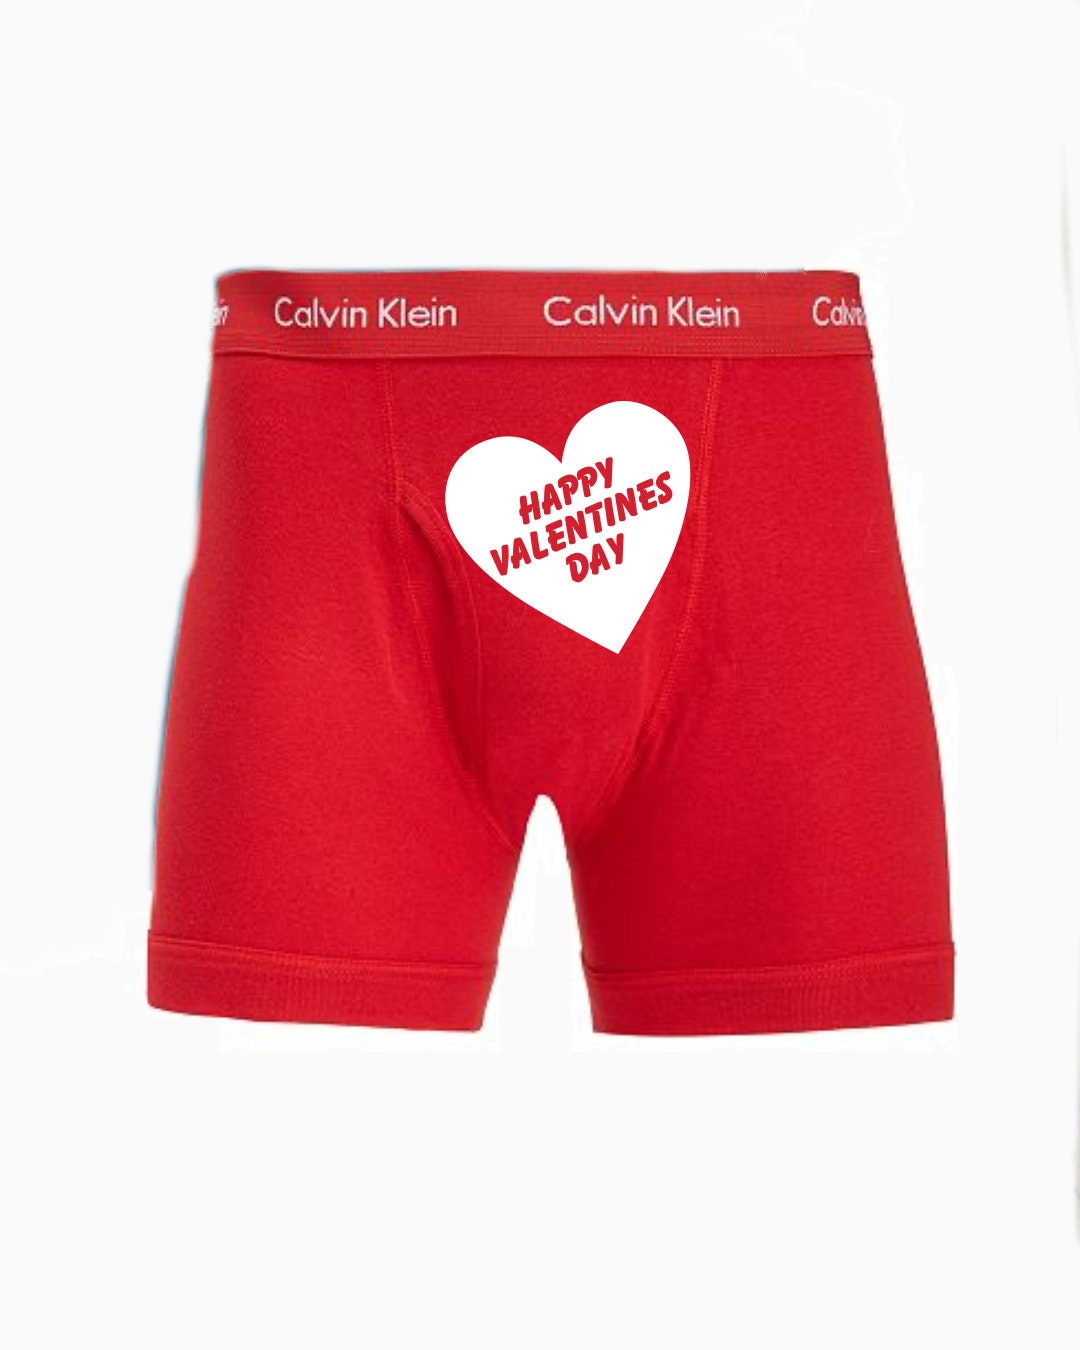 Happy Valentines Day Calvin Klein Mens Boxer Briefs FAST SHIPPING Valentine's  Day Gift for Him Please Read Description for Options 